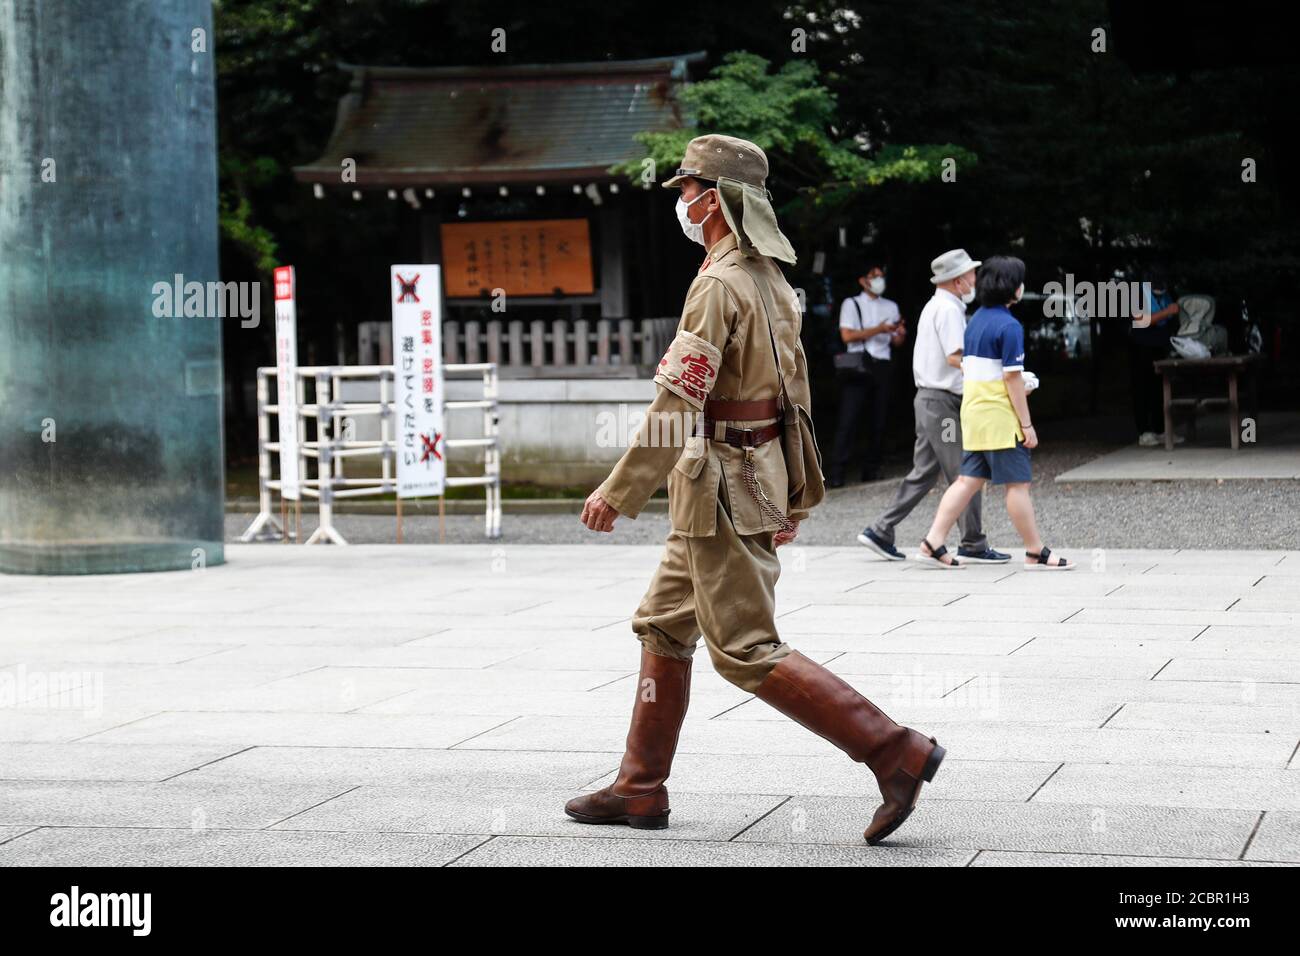 Tokyo, Japan. 15th Aug, 2020. A man dressed as a Japanese imperial army soldier is seen waiting to the Yasukuni Shrine during the 75th anniversary of Japan's surrender in World War II. This year, the temple has set signboards promoting the social distancing to prevent the spreading of the new coronavirus (COVID-19) disease at the Yasukuni Shrine. Credit: Rodrigo Reyes Marin/ZUMA Wire/Alamy Live News Stock Photo